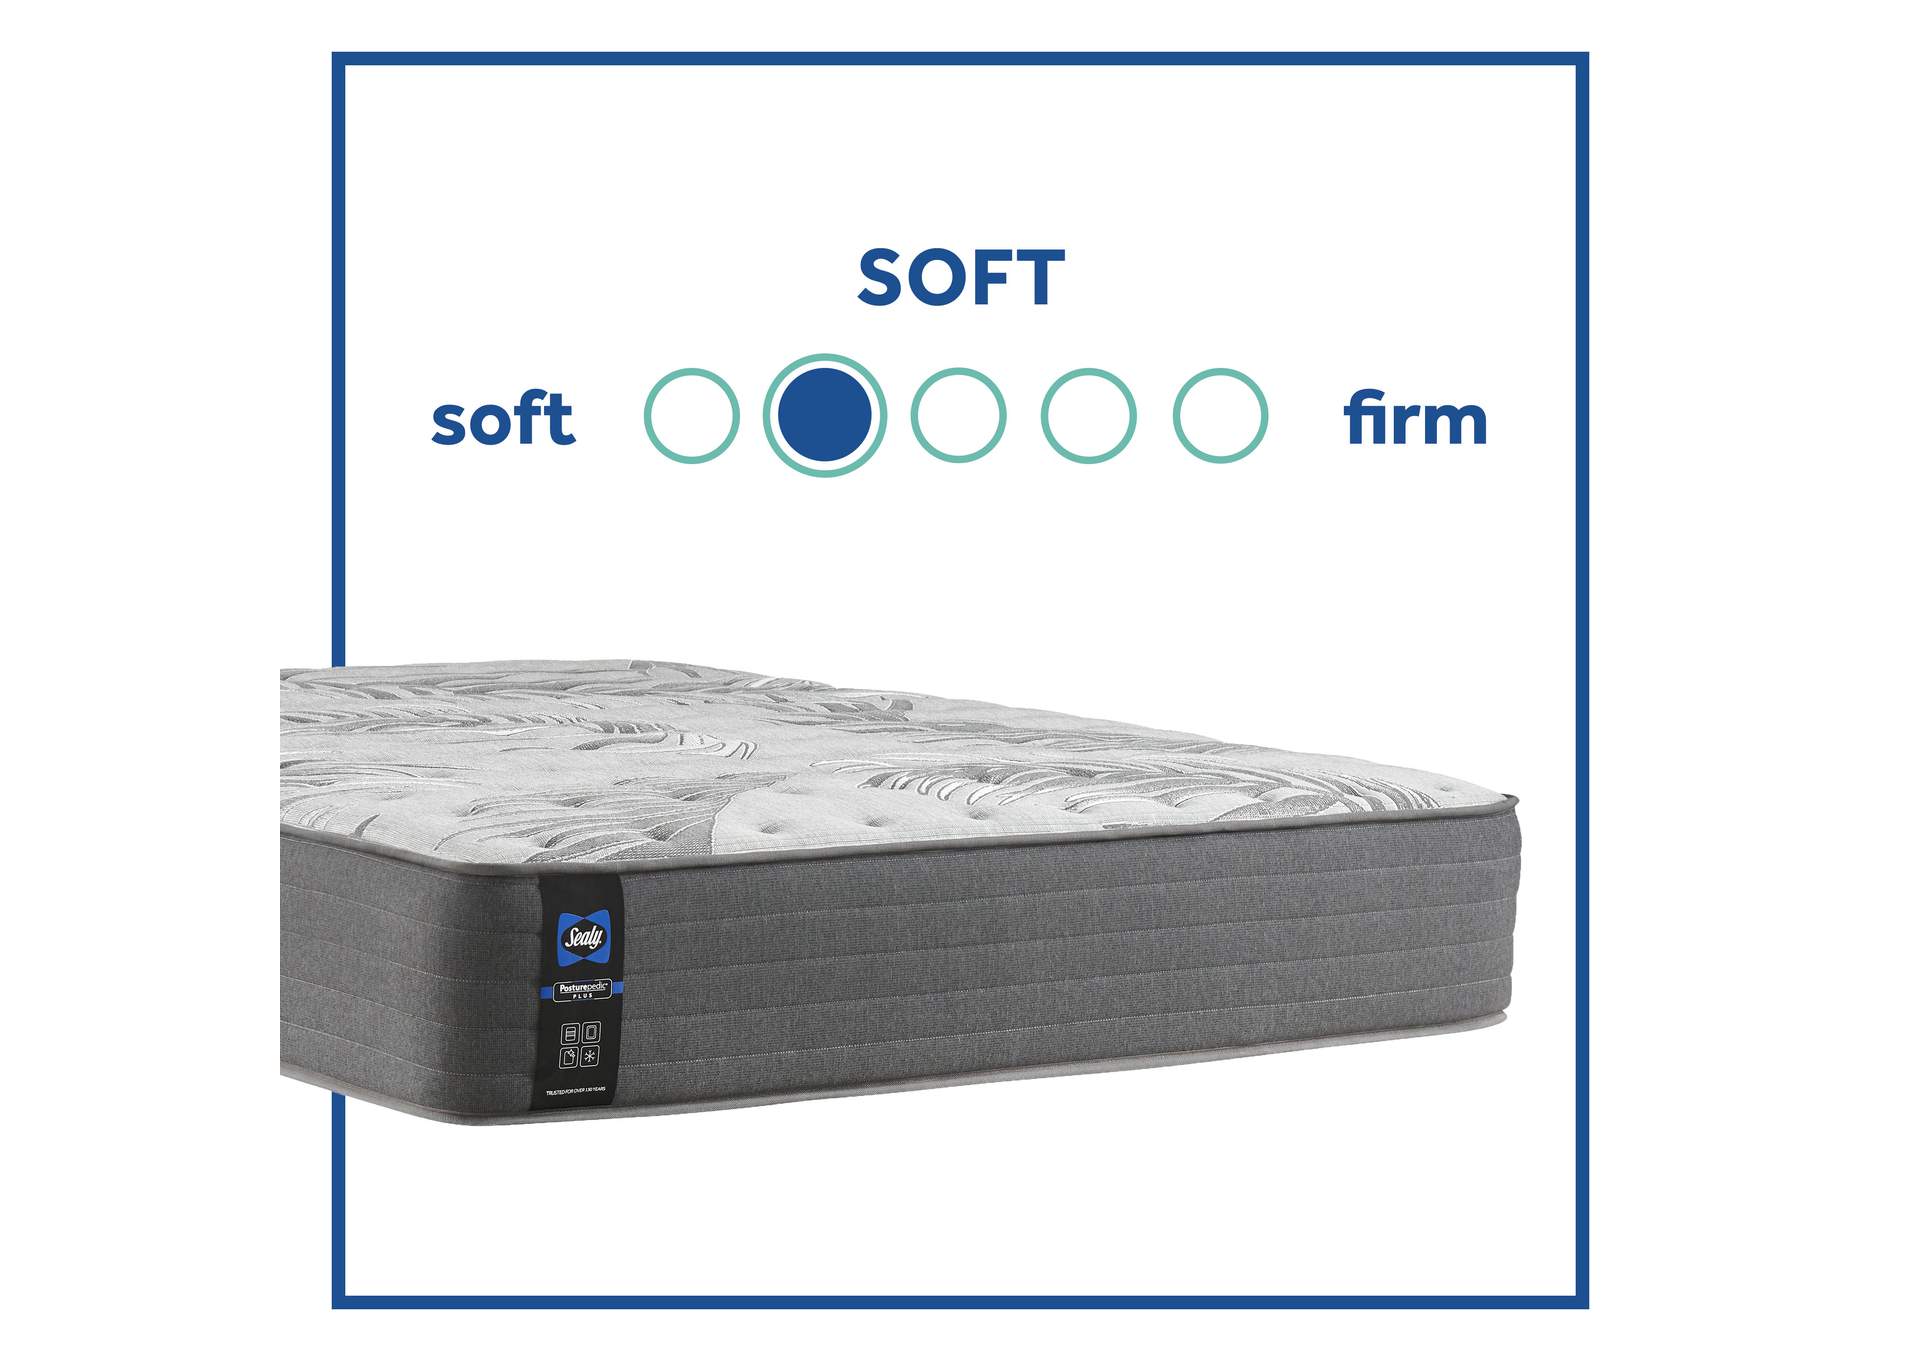 Testimony II Soft Tight Top Queen Mattress,Sealy